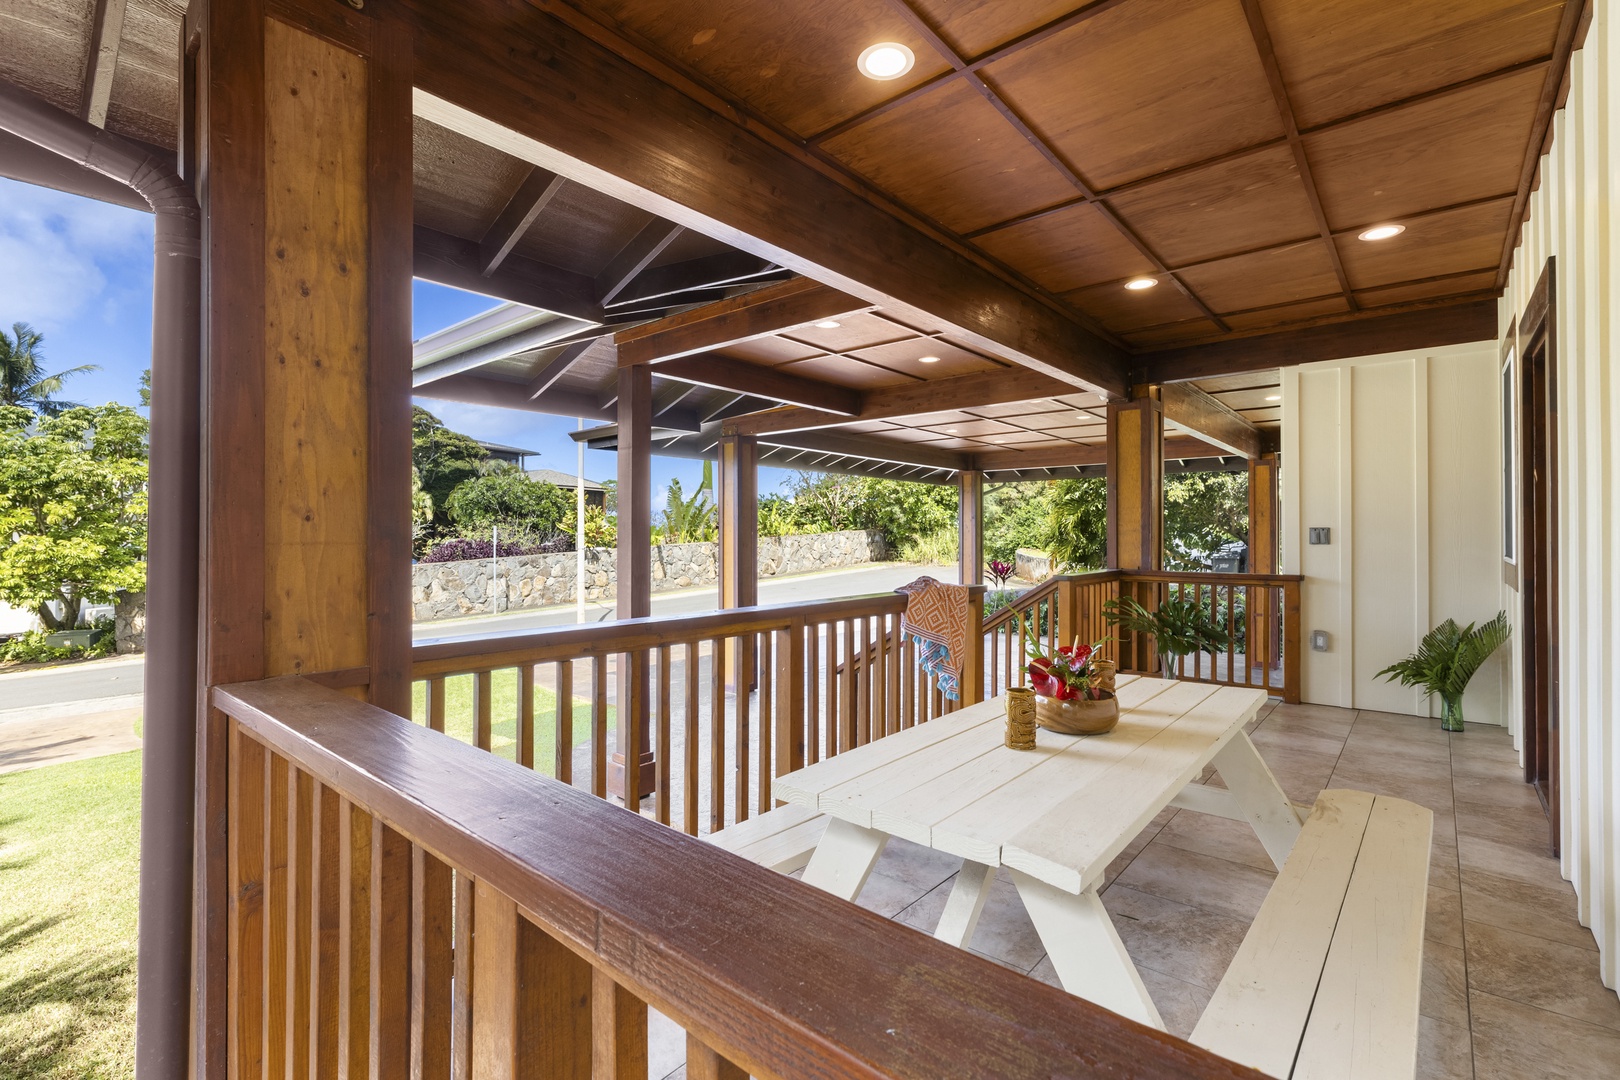 Haleiwa Vacation Rentals, Waimea Dream - A covered lanai downstairs is the perfect place for morning coffee.